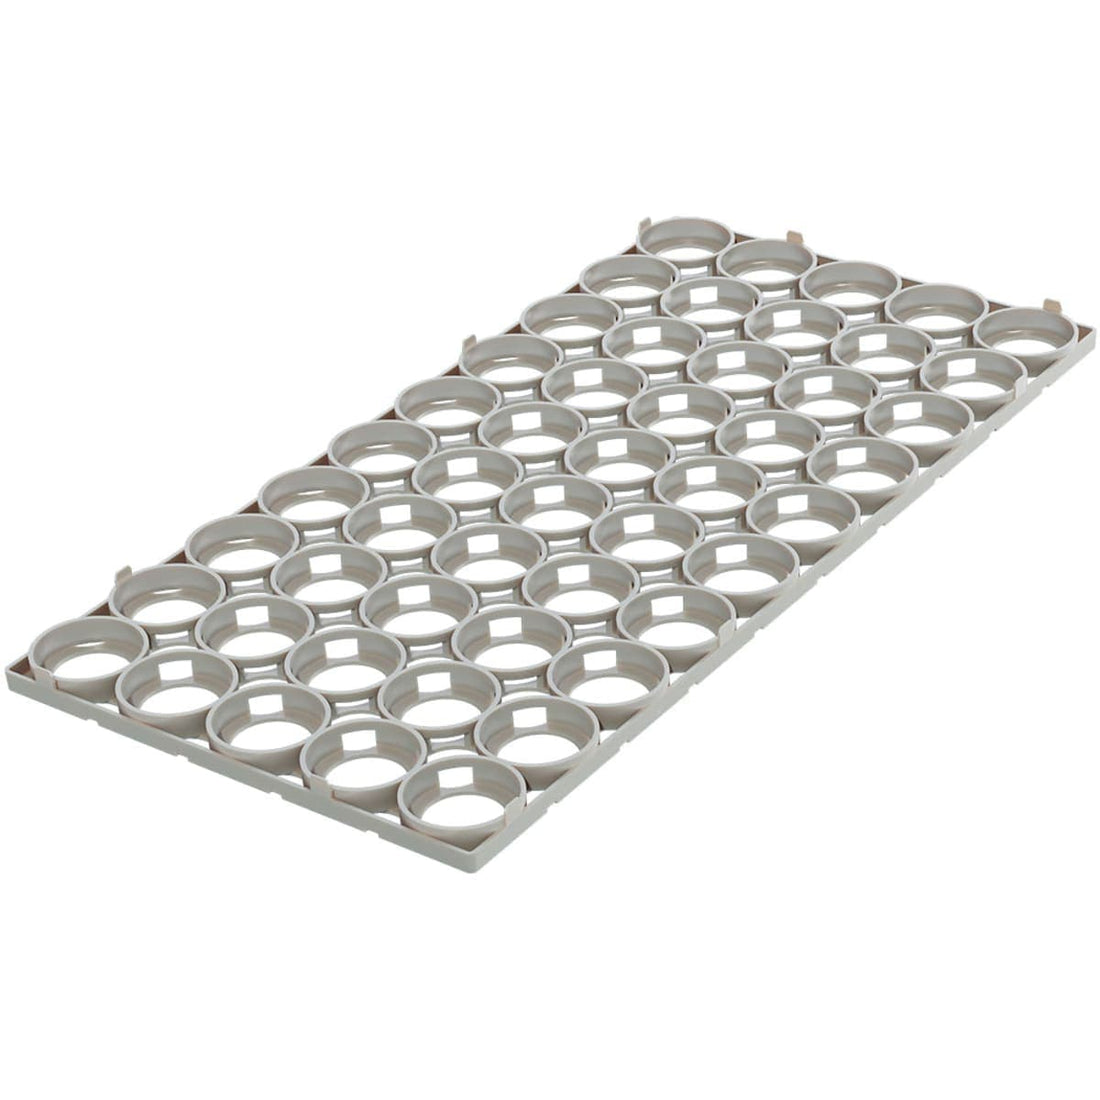 EASY PAVING SUPPORT MAT 40X80 FOR LAYING - best price from Maltashopper.com BR500011481